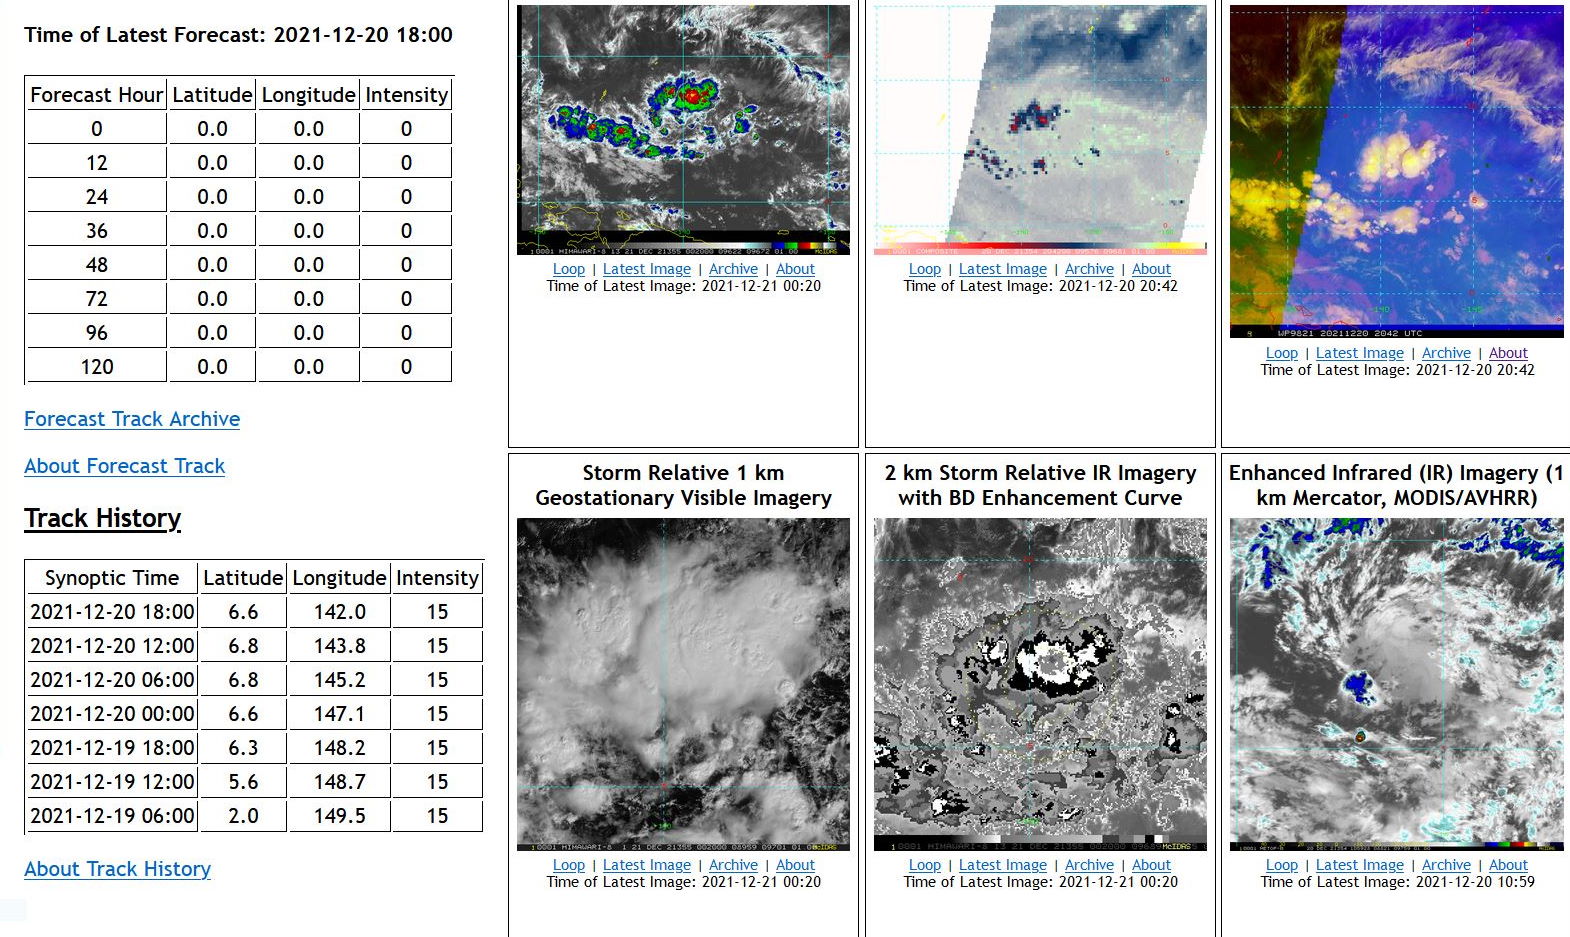 28W(RAI): Final Warning for an infamous cyclone! // Invest 94B: Medium// Invest 98W, 21/00utc